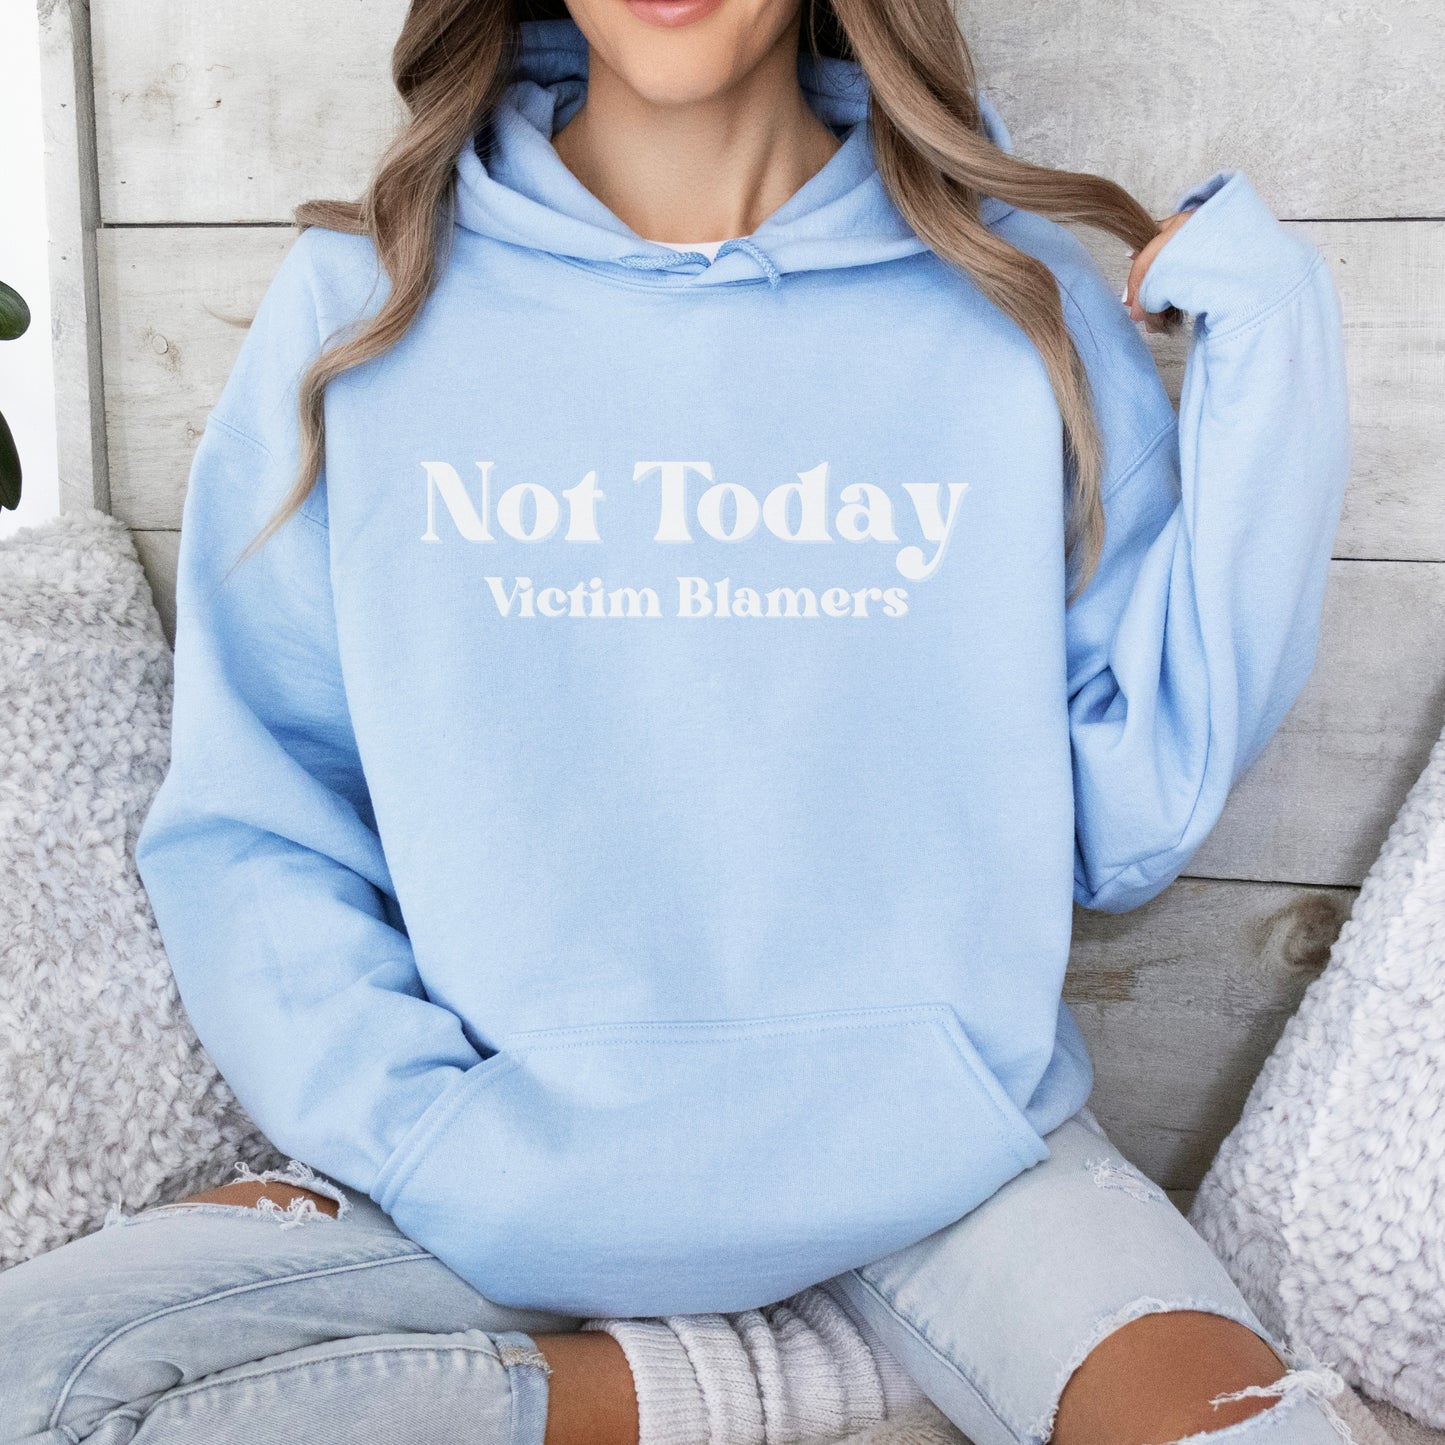 The front of the hooded sweatshirt proudly displays the phrase Not Today Victim Blamers in a bold and eye catching font. This message serves as a reminder that we reject victim blaming and support those who have faced injustice.